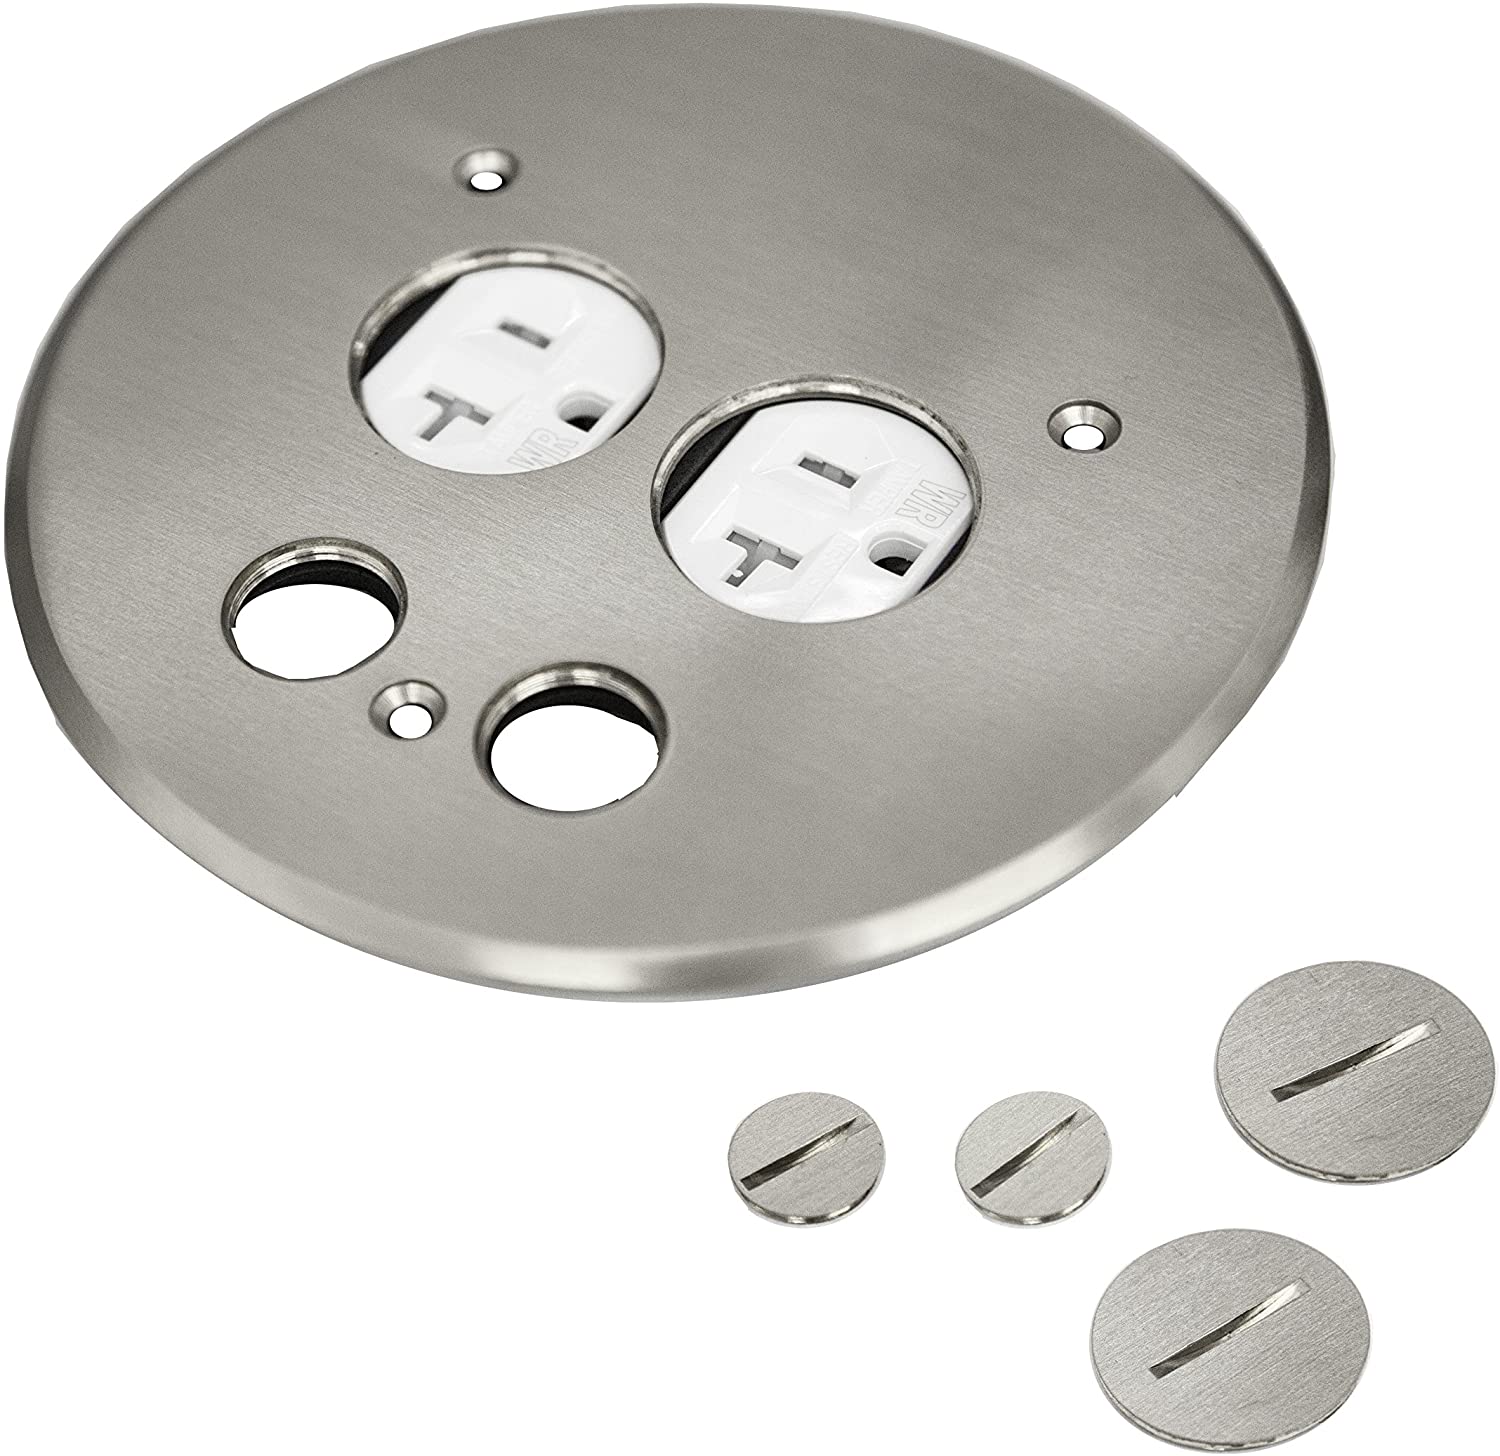 2-Gang ROUND Floor Box Assembly Kit w/ Nickel Flip Cover 15A TR Duplex Outlets 